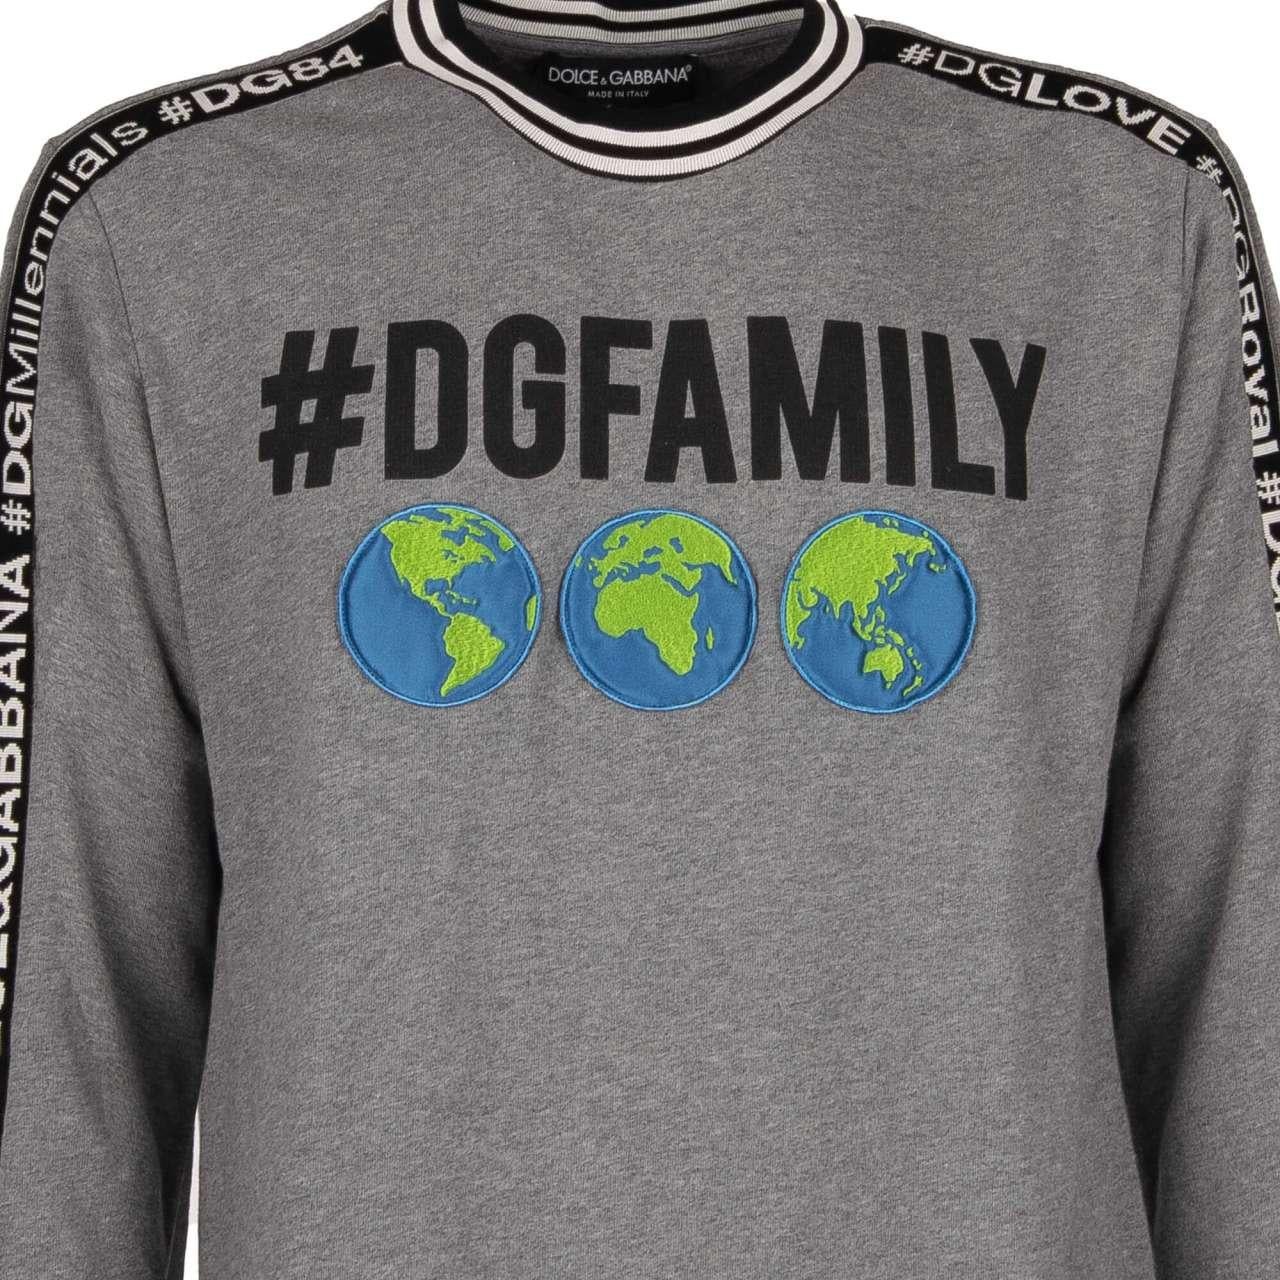 - DG Family Sweater / sweatshirt embellished with Earth embroidery and knitted elements with DG hashtag writings in gray by DOLCE & GABBANA - RUNWAY - Dolce & Gabbana Fashion Show - New with Tags - Former RRP: EUR 545 - MADE IN ITALY - Standard fit